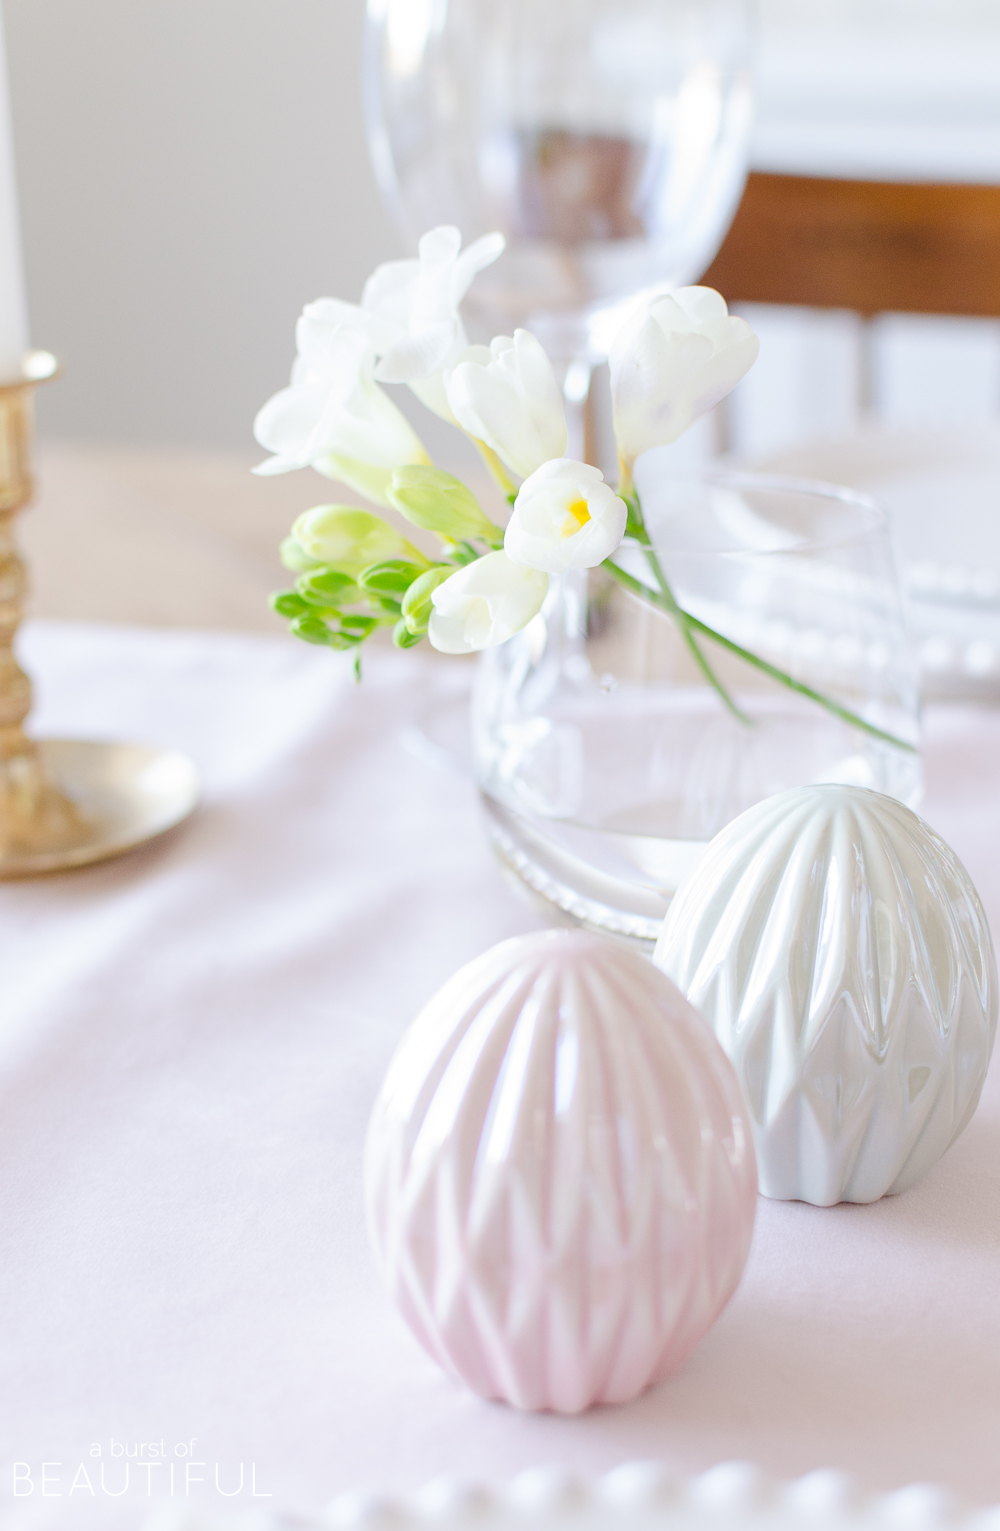 Host a beautiful Easter brunch or dinner with these colorful Easter tablescape and centerpiece ideas.